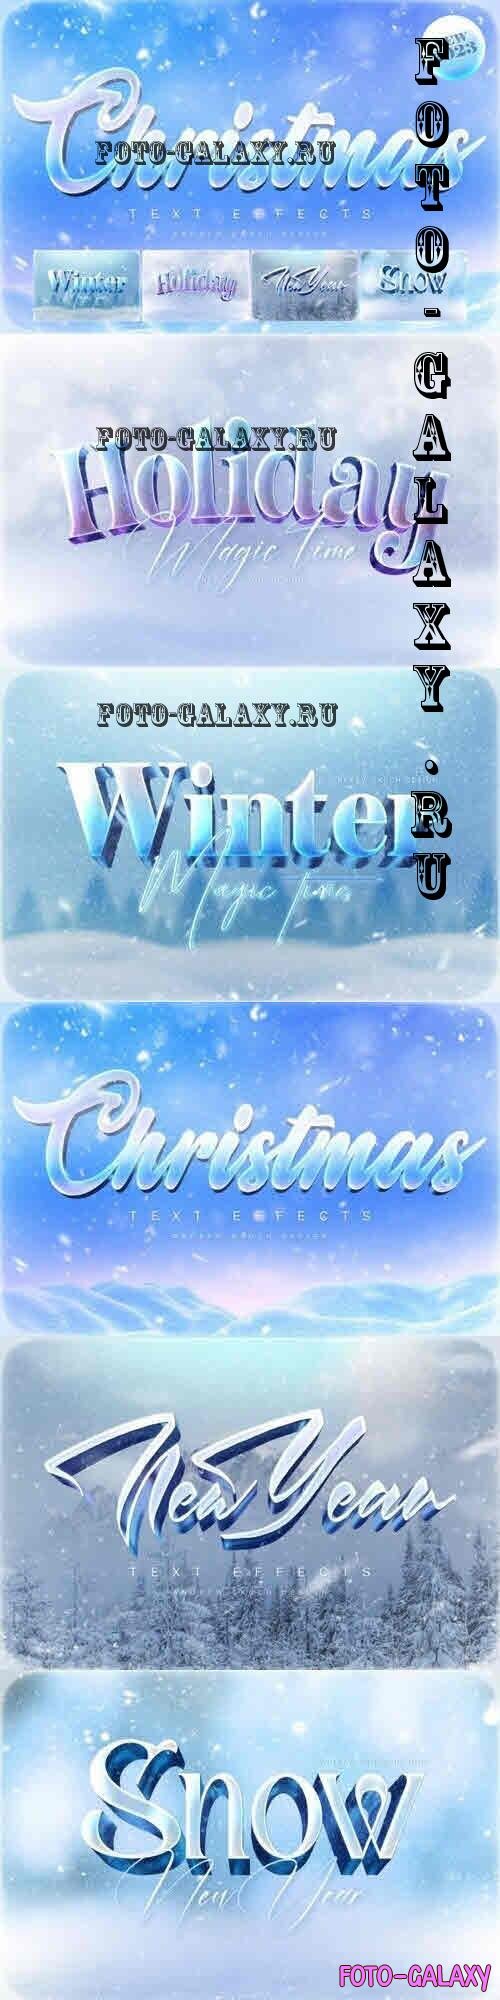 Christmas Text Effects - 10950601